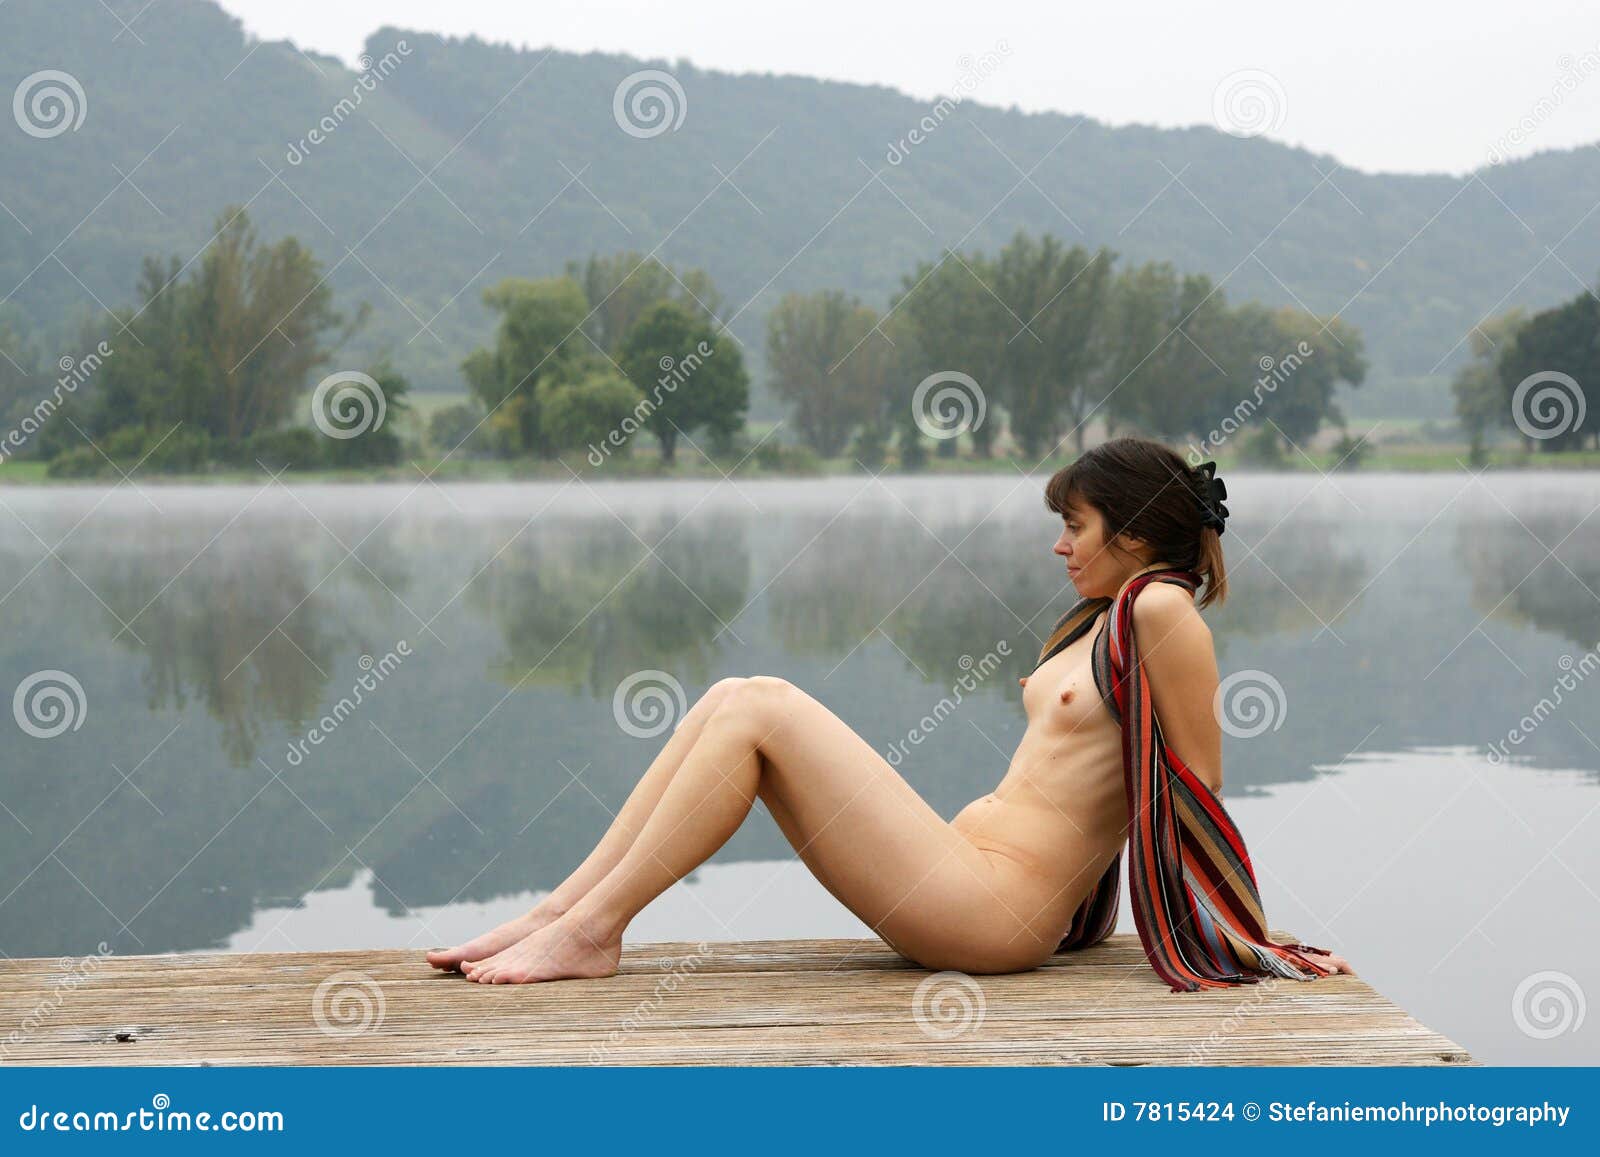 Lady in the Lake nude photos